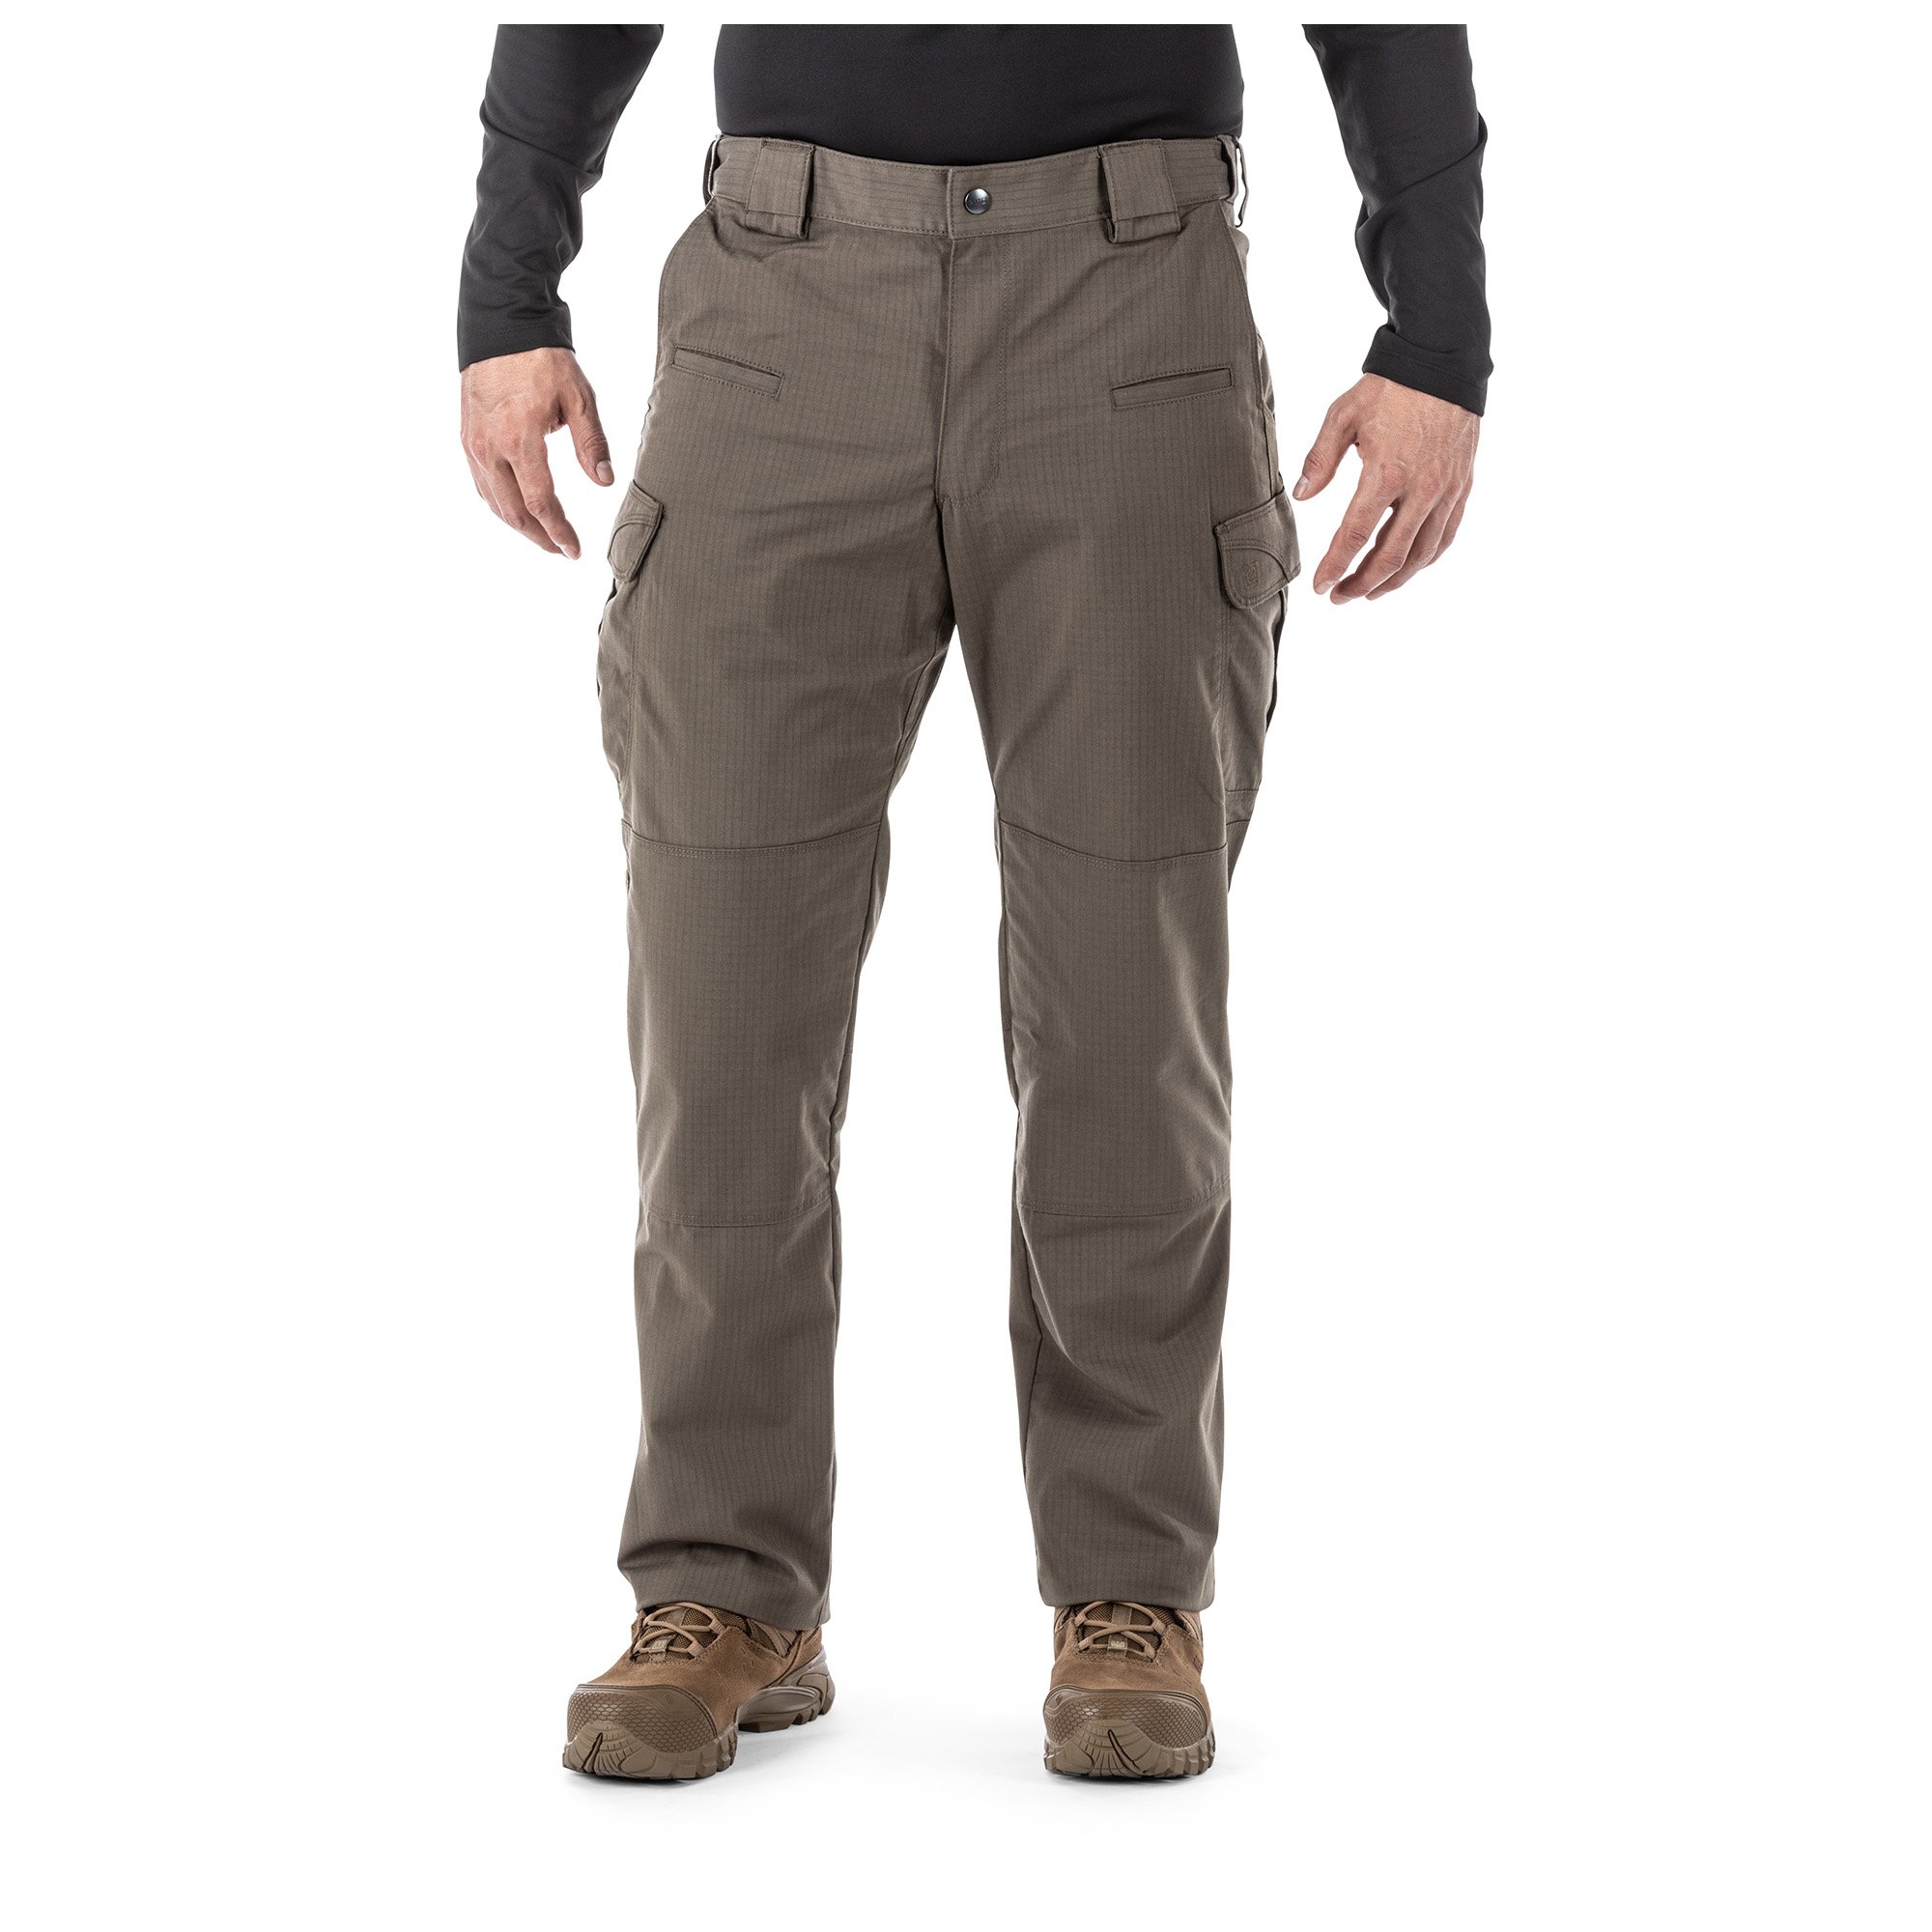 5.11 Work Gear Men's Stryke Pants, Adjustable Waistband, Stretchable Flex-Tac Fabric, Storm, 40W x 32L, Style 74369 - image 1 of 7